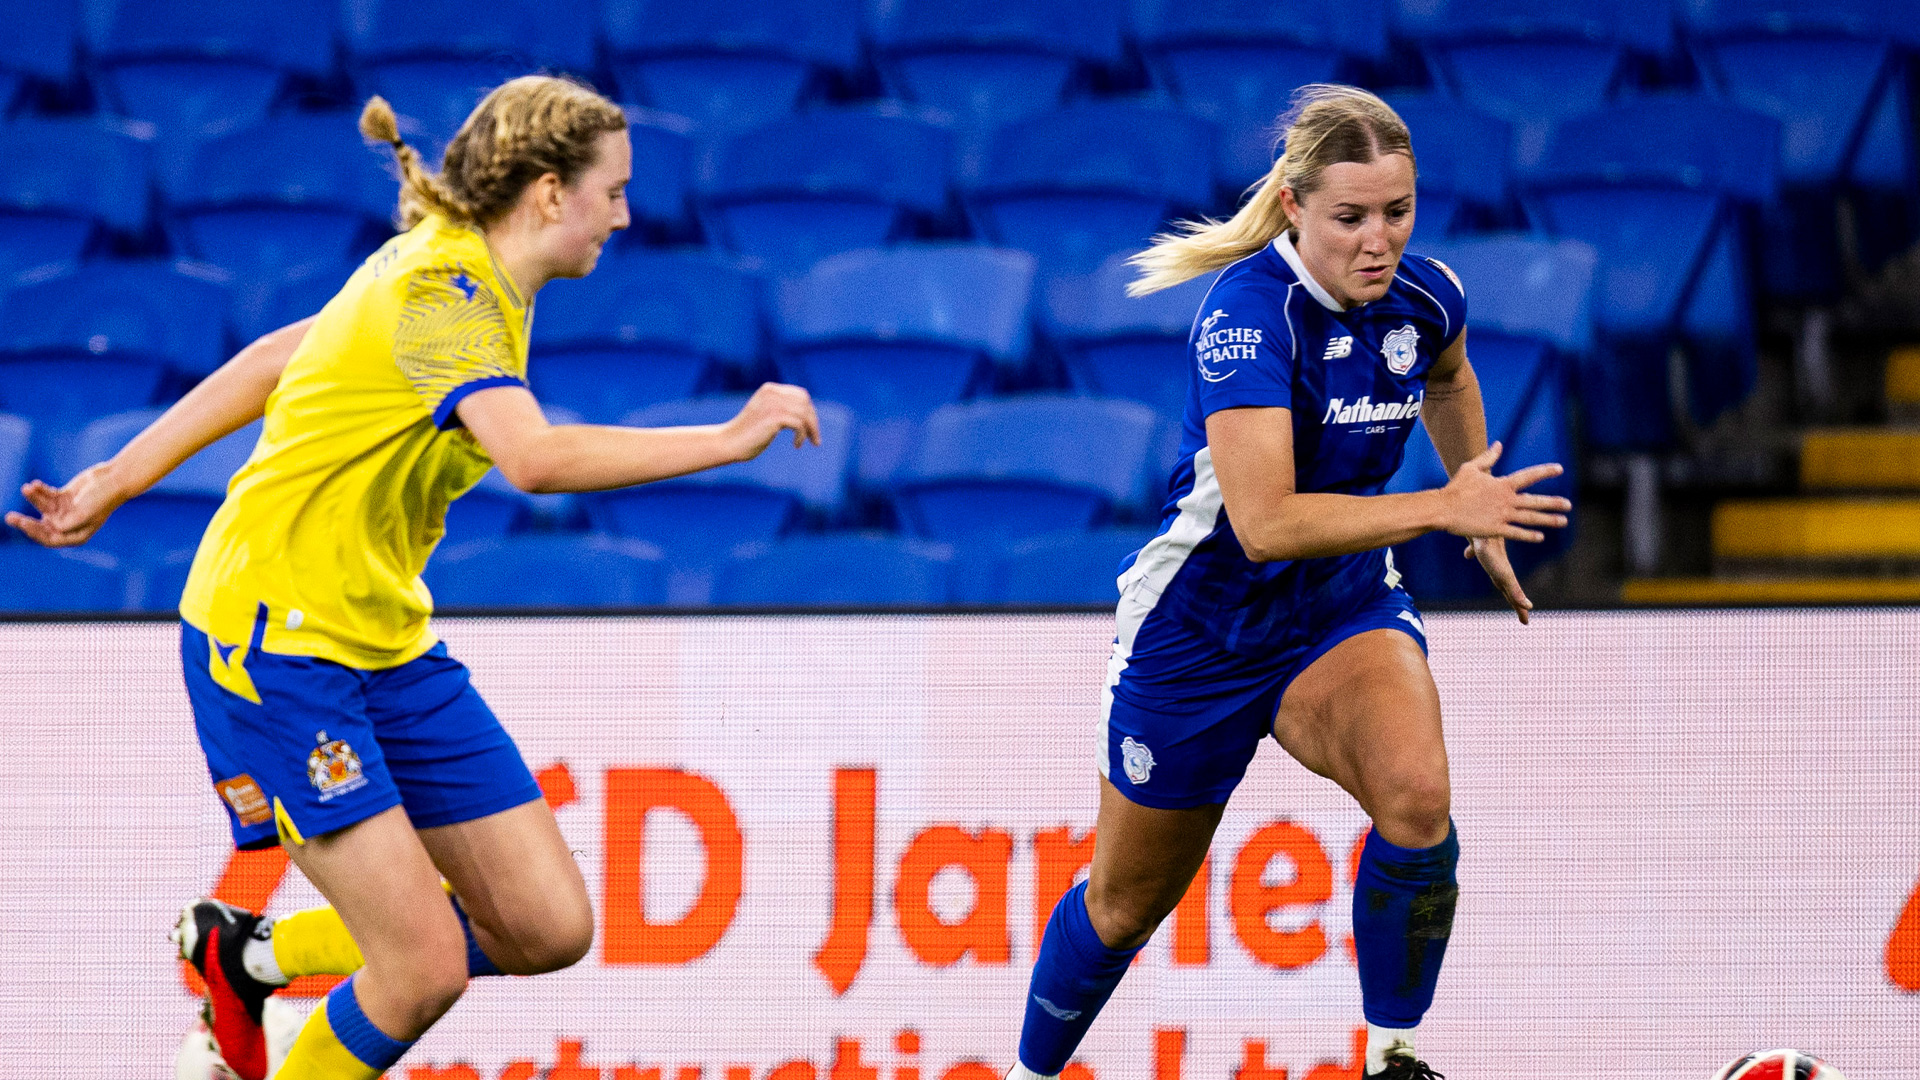 Danielle Green in action for Cardiff City Women